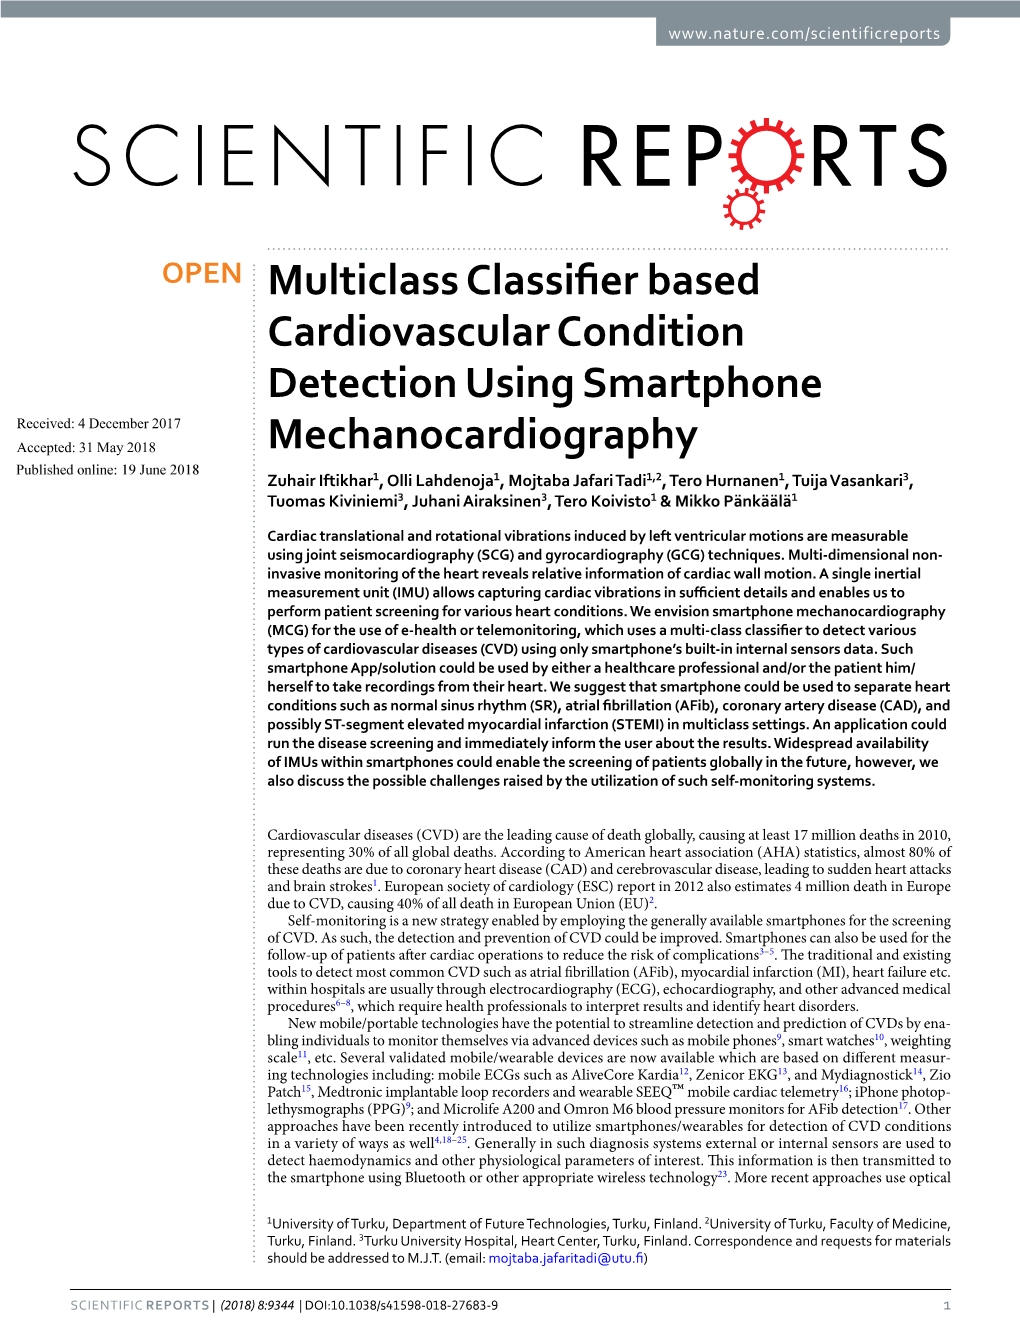 Multiclass Classifier Based Cardiovascular Condition Detection Using Smartphone Mechanocardiography